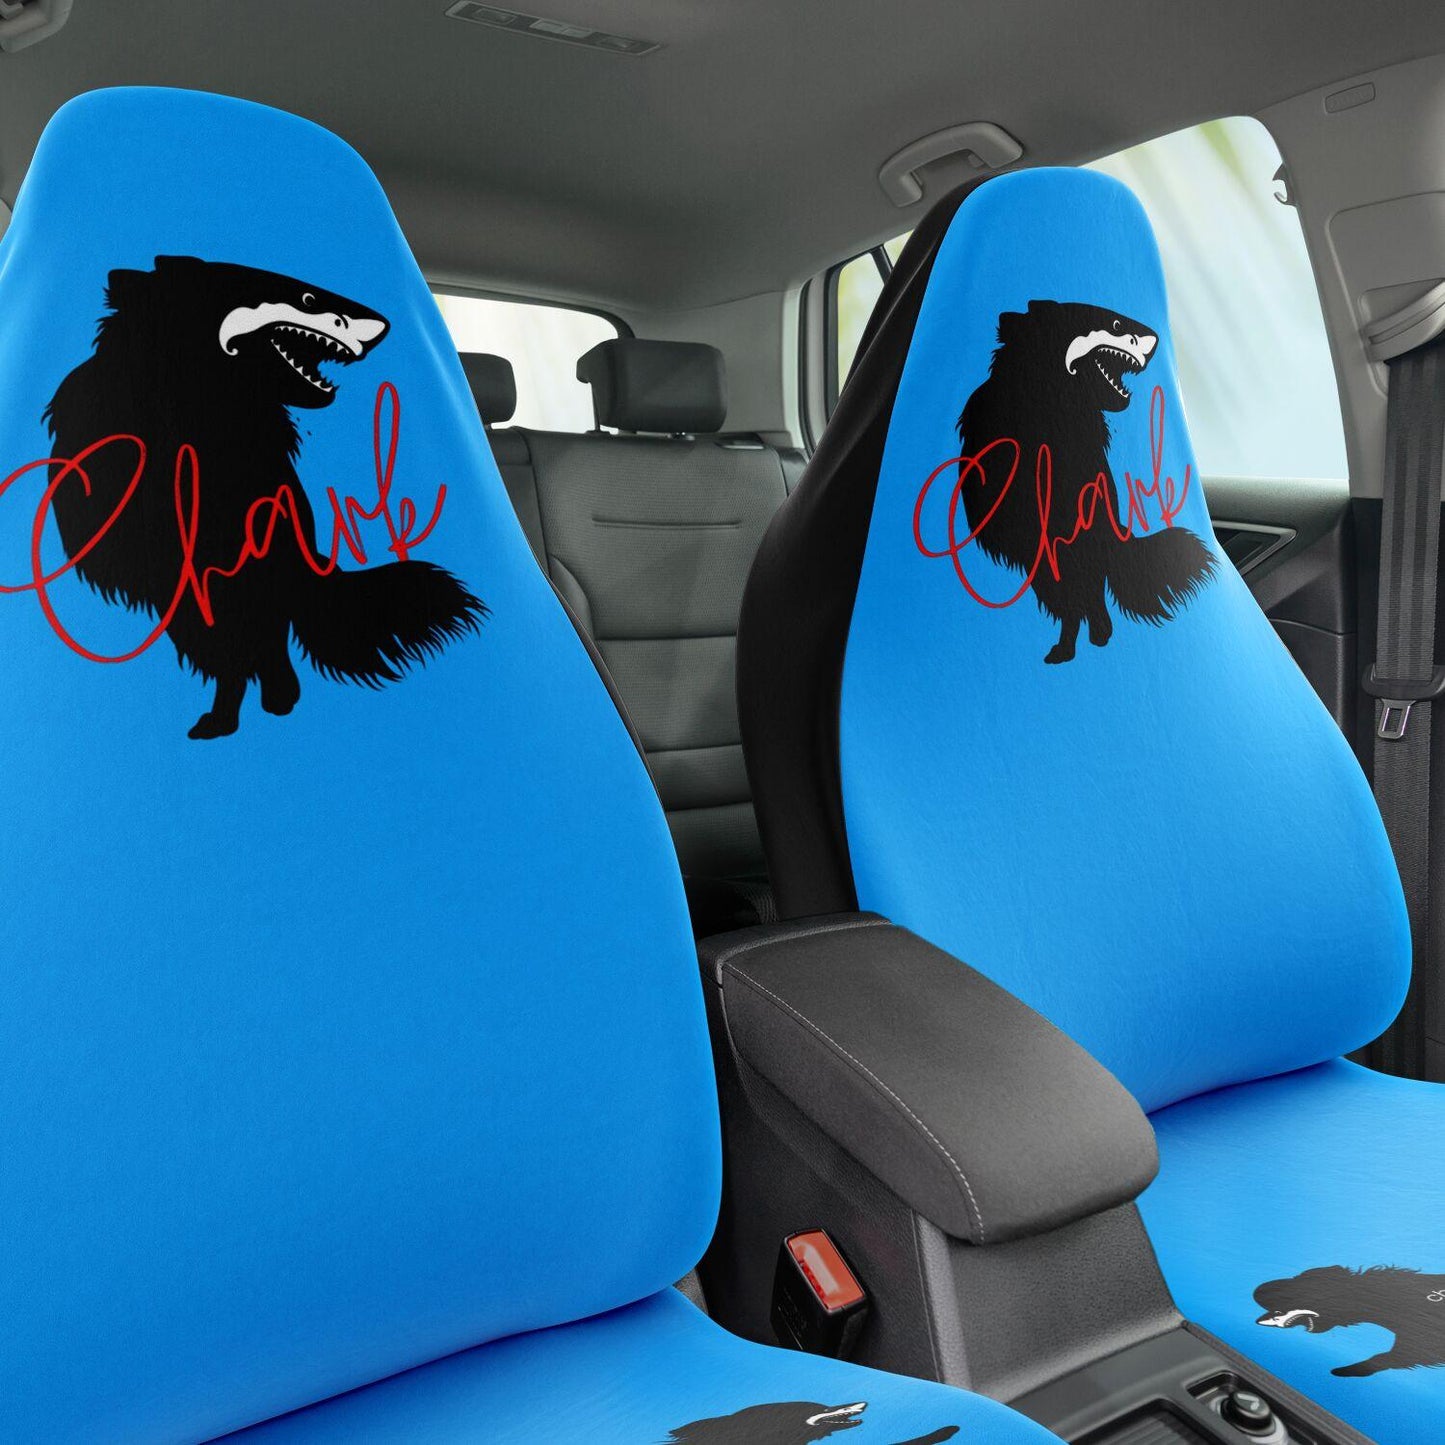 This punky pair of electric blue front car seat covers feature the silhouette of a black longhair chihuahua with the face of a great white shark - mouth open to show off jaws lined with sharp teeth. The word "Chark" is artfully placed in red cursive font over the image. The seat fronts feature another shark-faced chihuahua, and a "dictionary entry" of the noun "chark": a chihuahua with teeth like a shark. Design by Renate Kriegler for Chimigos.